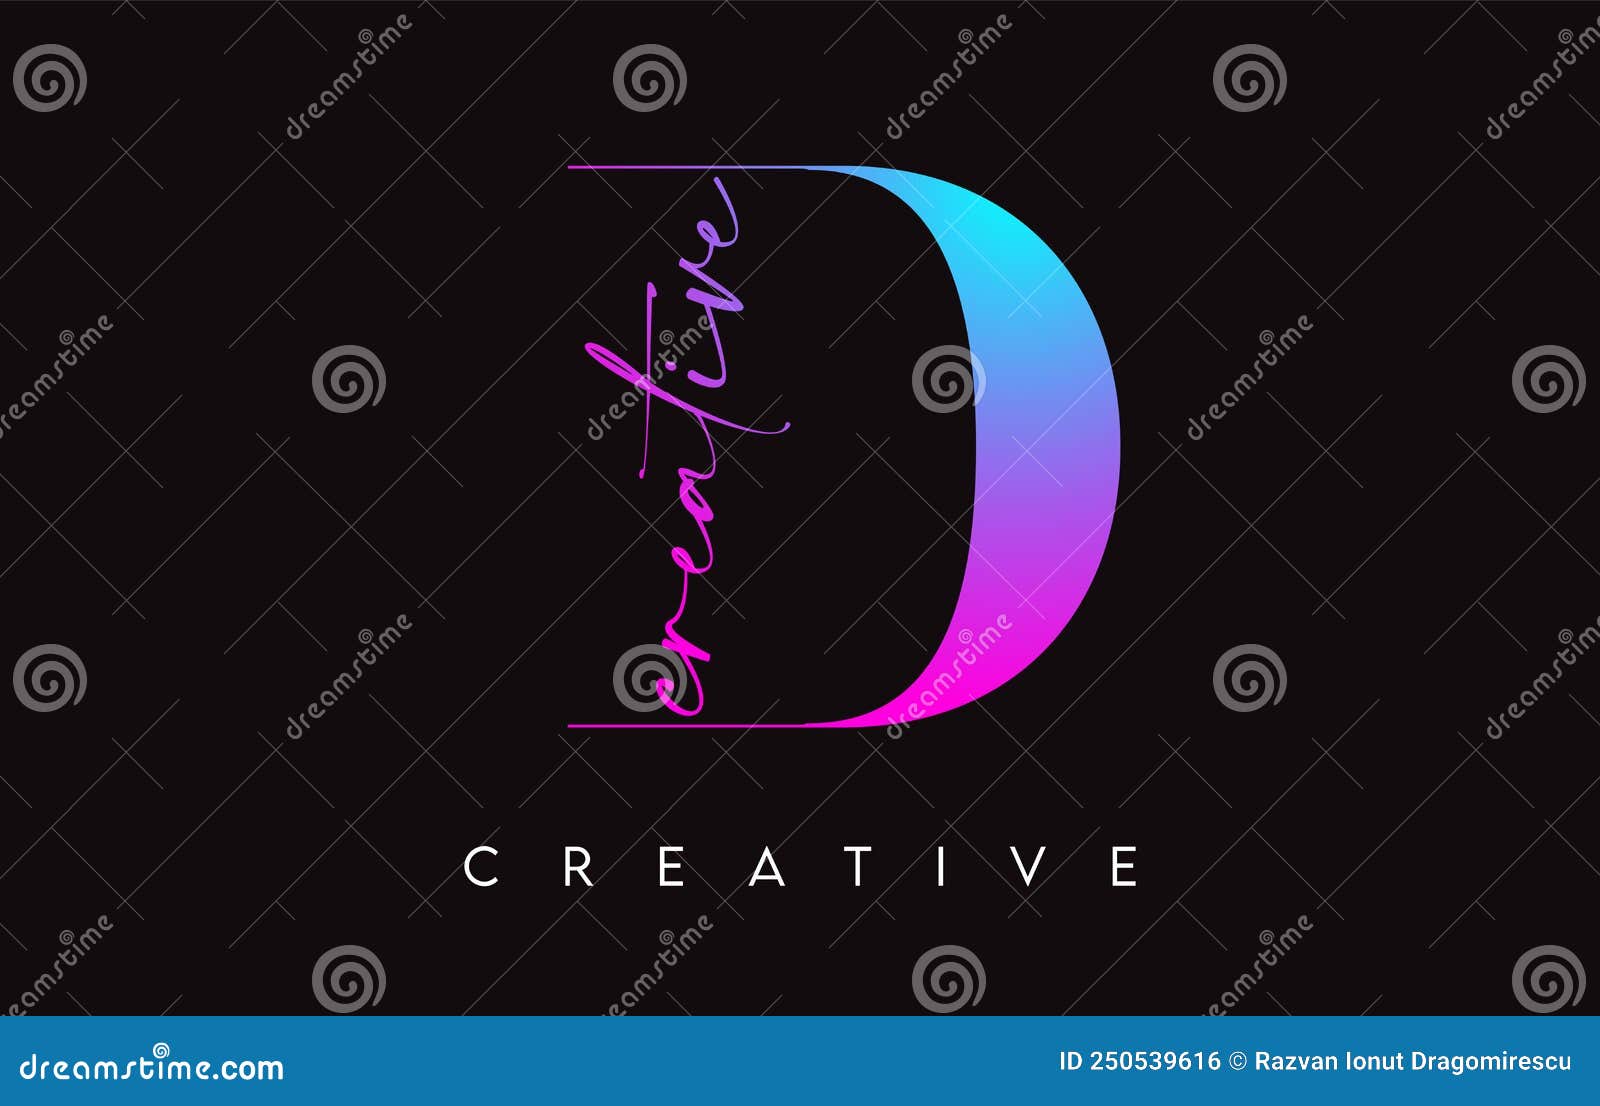 D Letter Design with Creative Cut and Serif Font in Purple Blue Colors ...